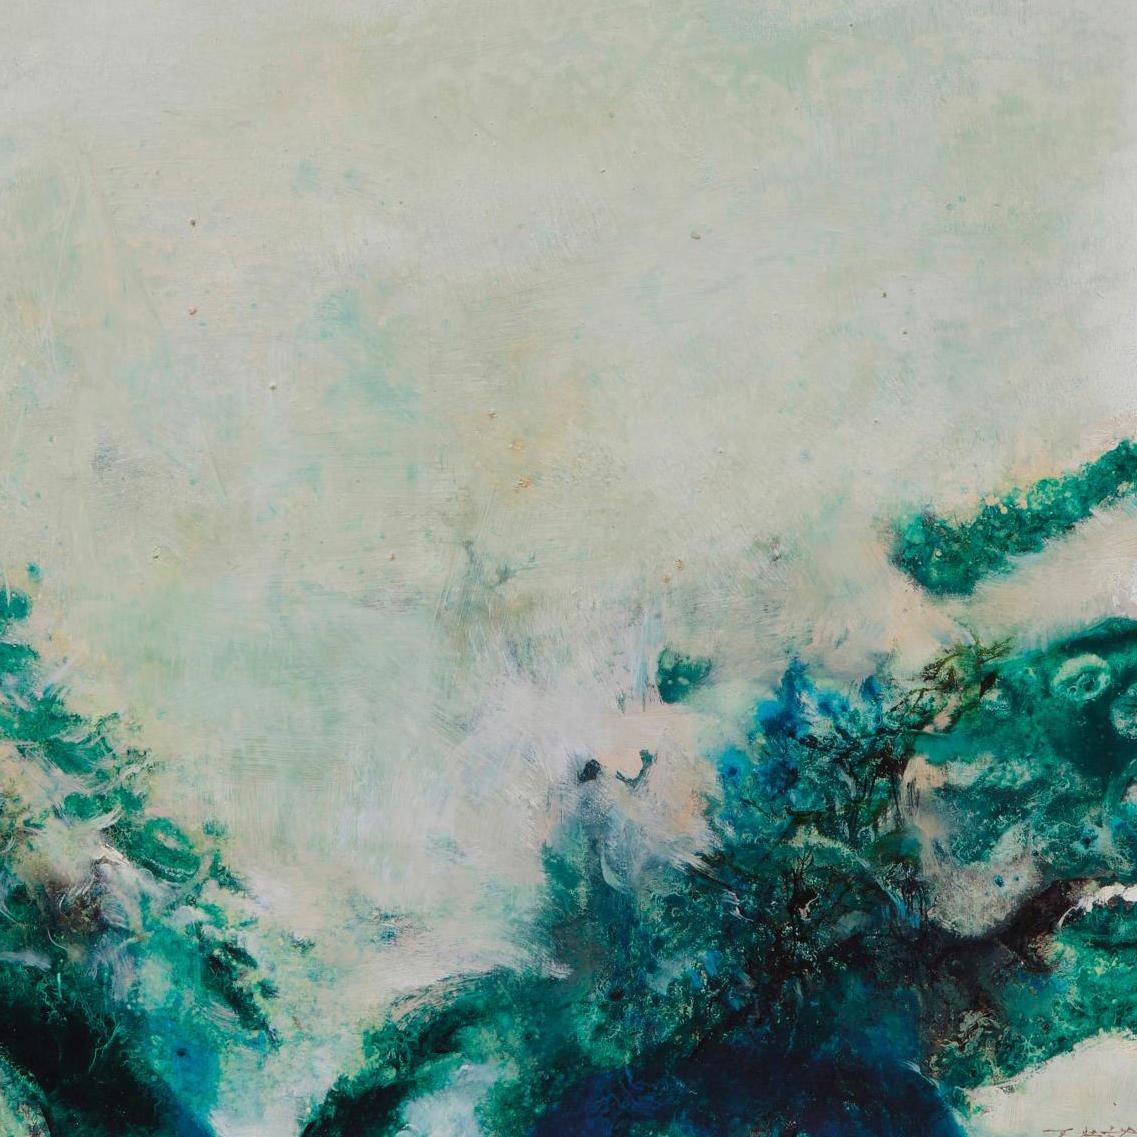 The “Empty” and the “Whole” by Zao Wou-ki